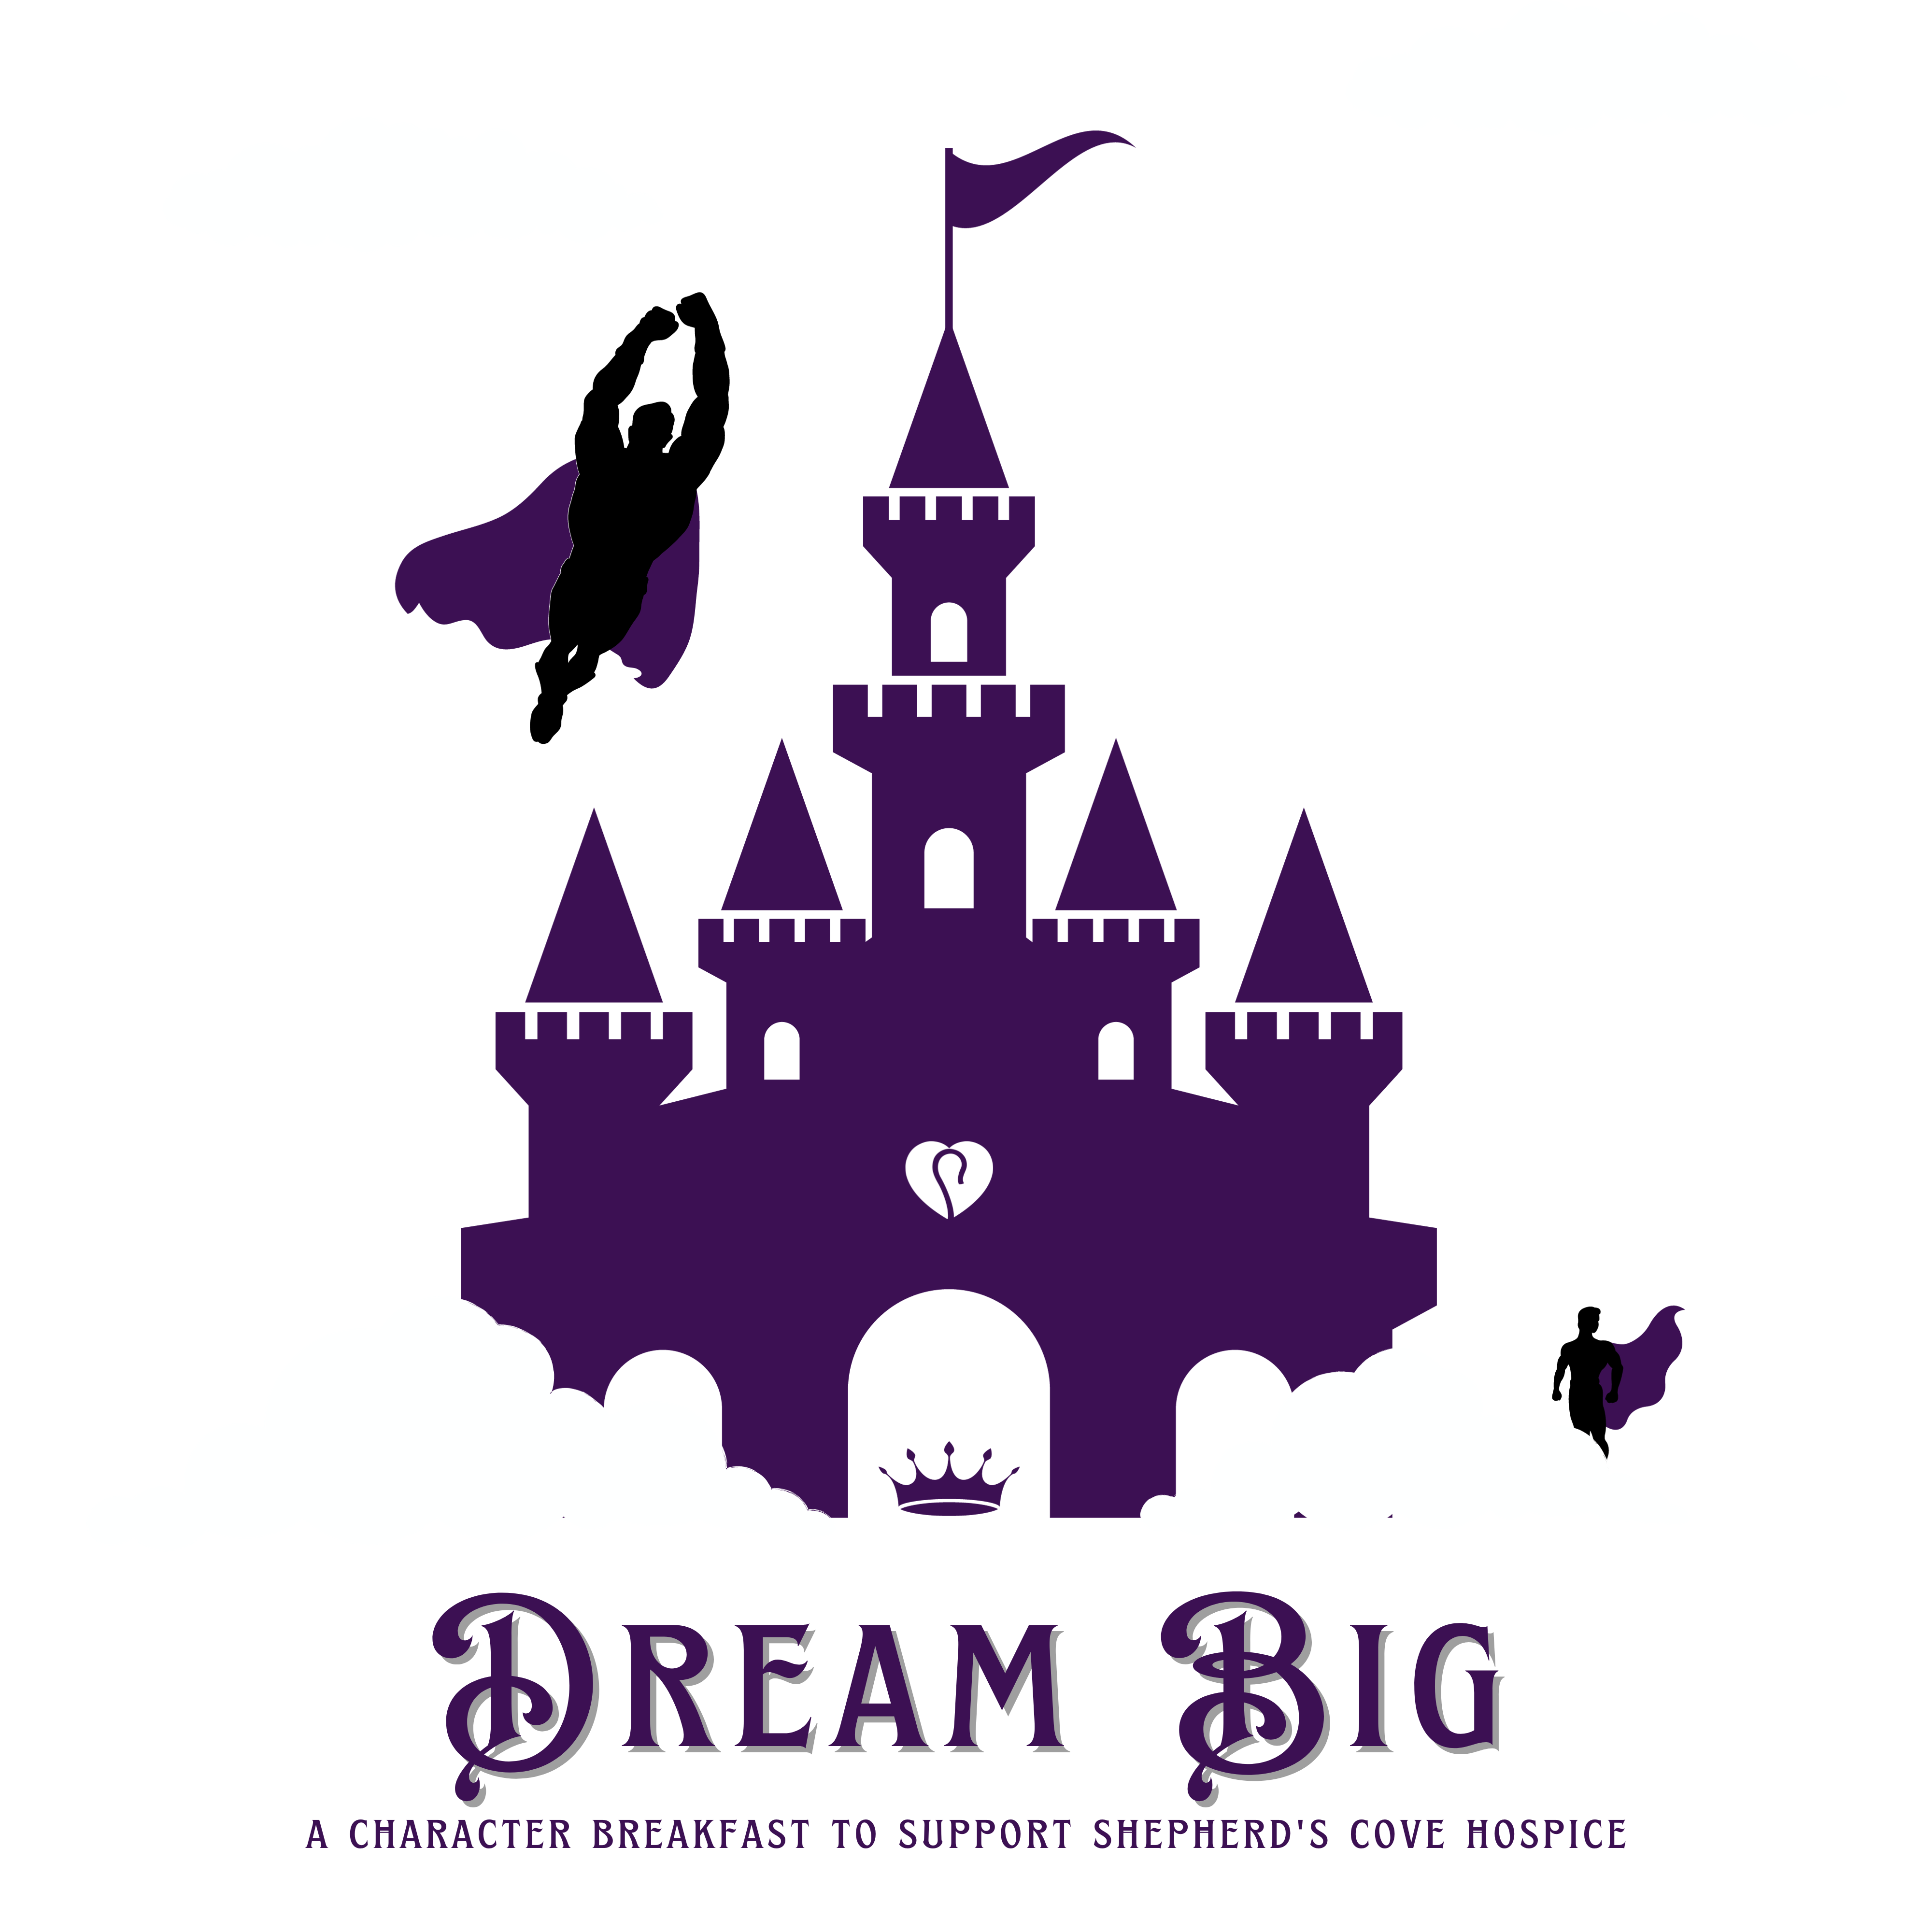 Calling all superheroes and royalty!
You are invited to attend the Dream Big Character Breakfast!
Saturday, March 2nd at 8:30 am at Santa Fe Cattle Co. - Albertville, AL!

All tickets include a pancake breakfast and a commemorative picture with a character!
Purchase tickets at www.dreambigsch.com.
Sponsorships available!